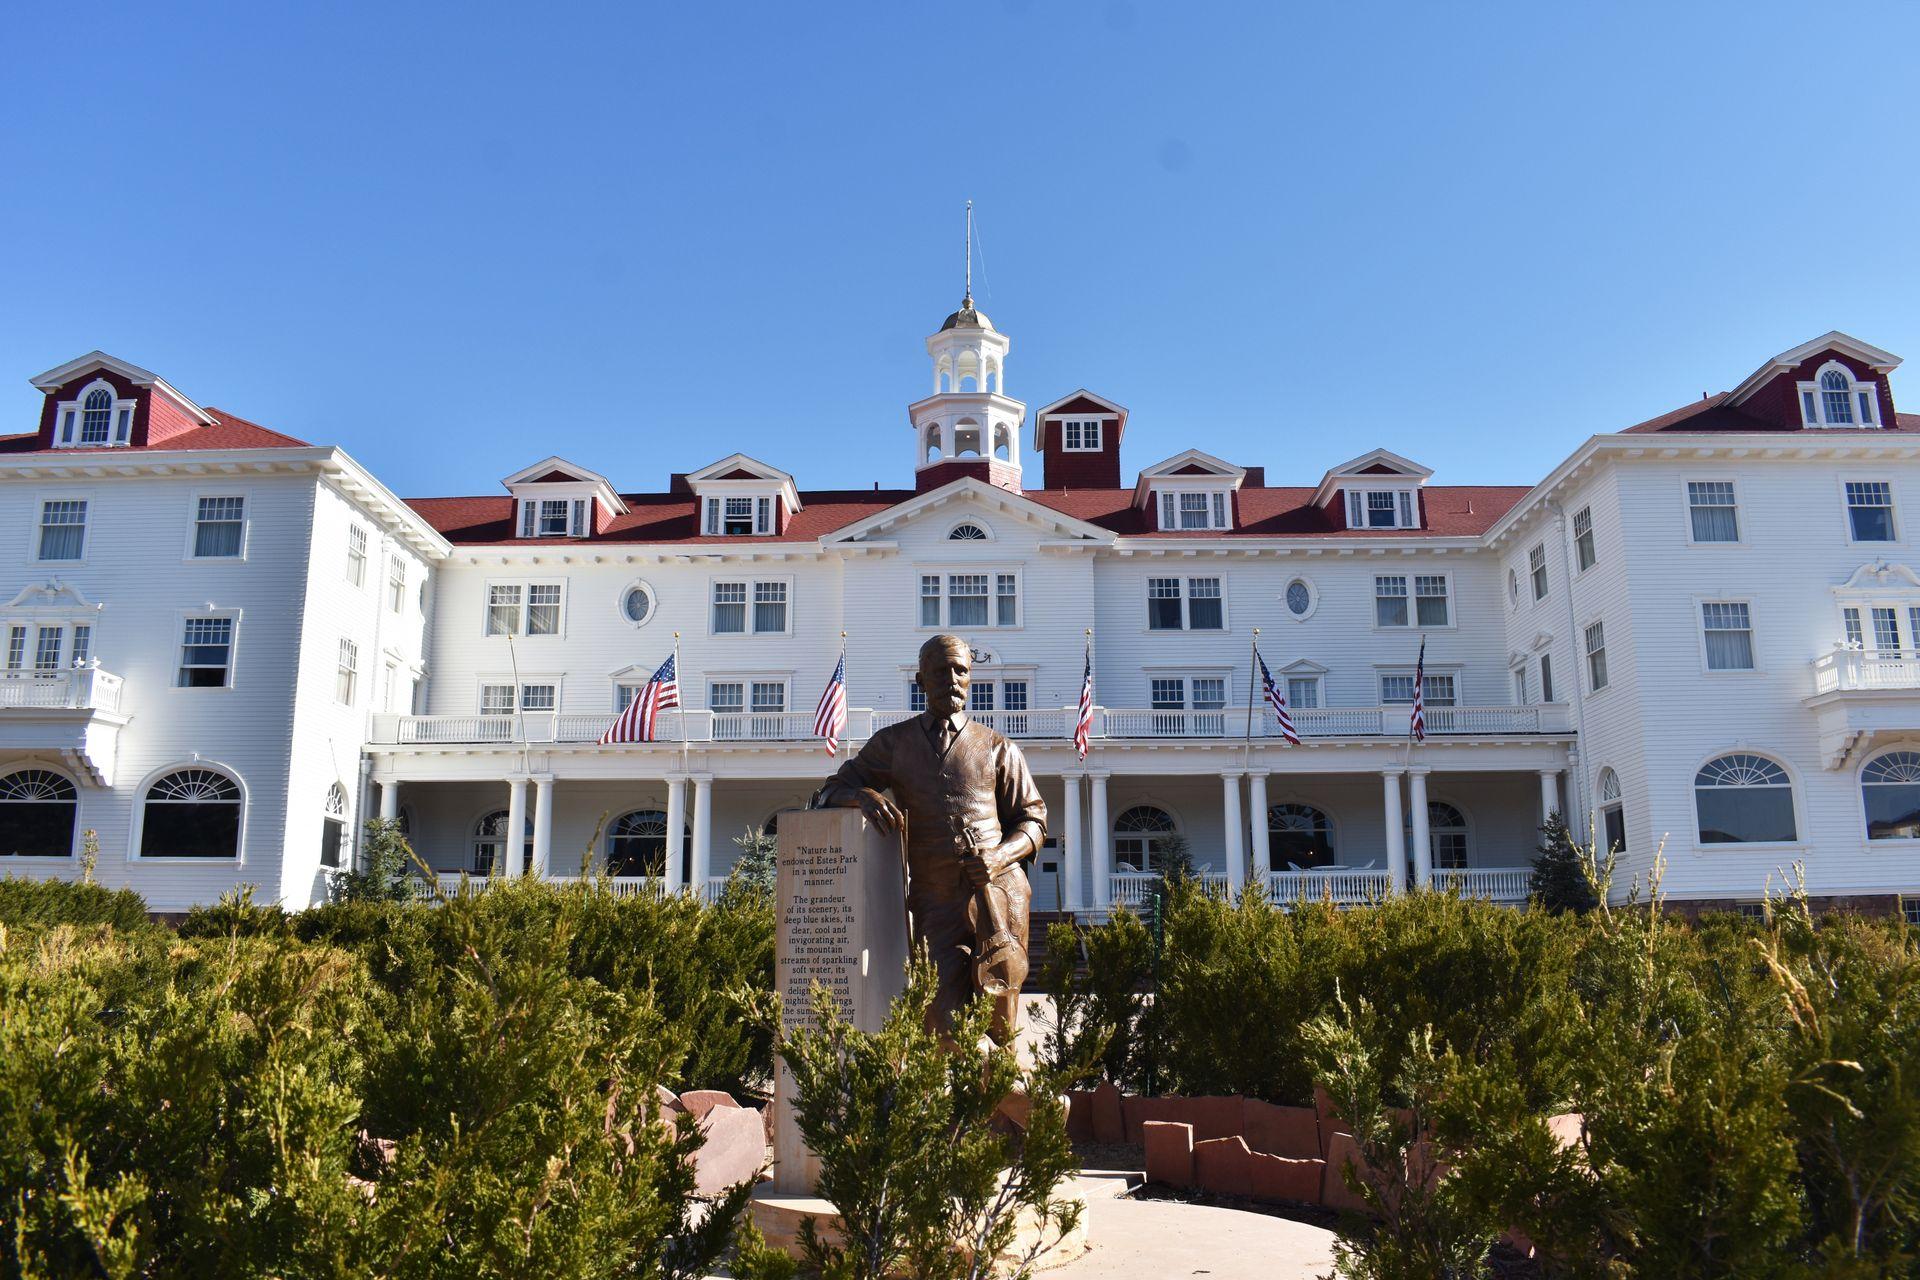 The exterior of the famous Stanley Hotel. The hotel is white with a red roof and has a large porch. There is a statue of a man leading on a pillar directly in front of the hotel.